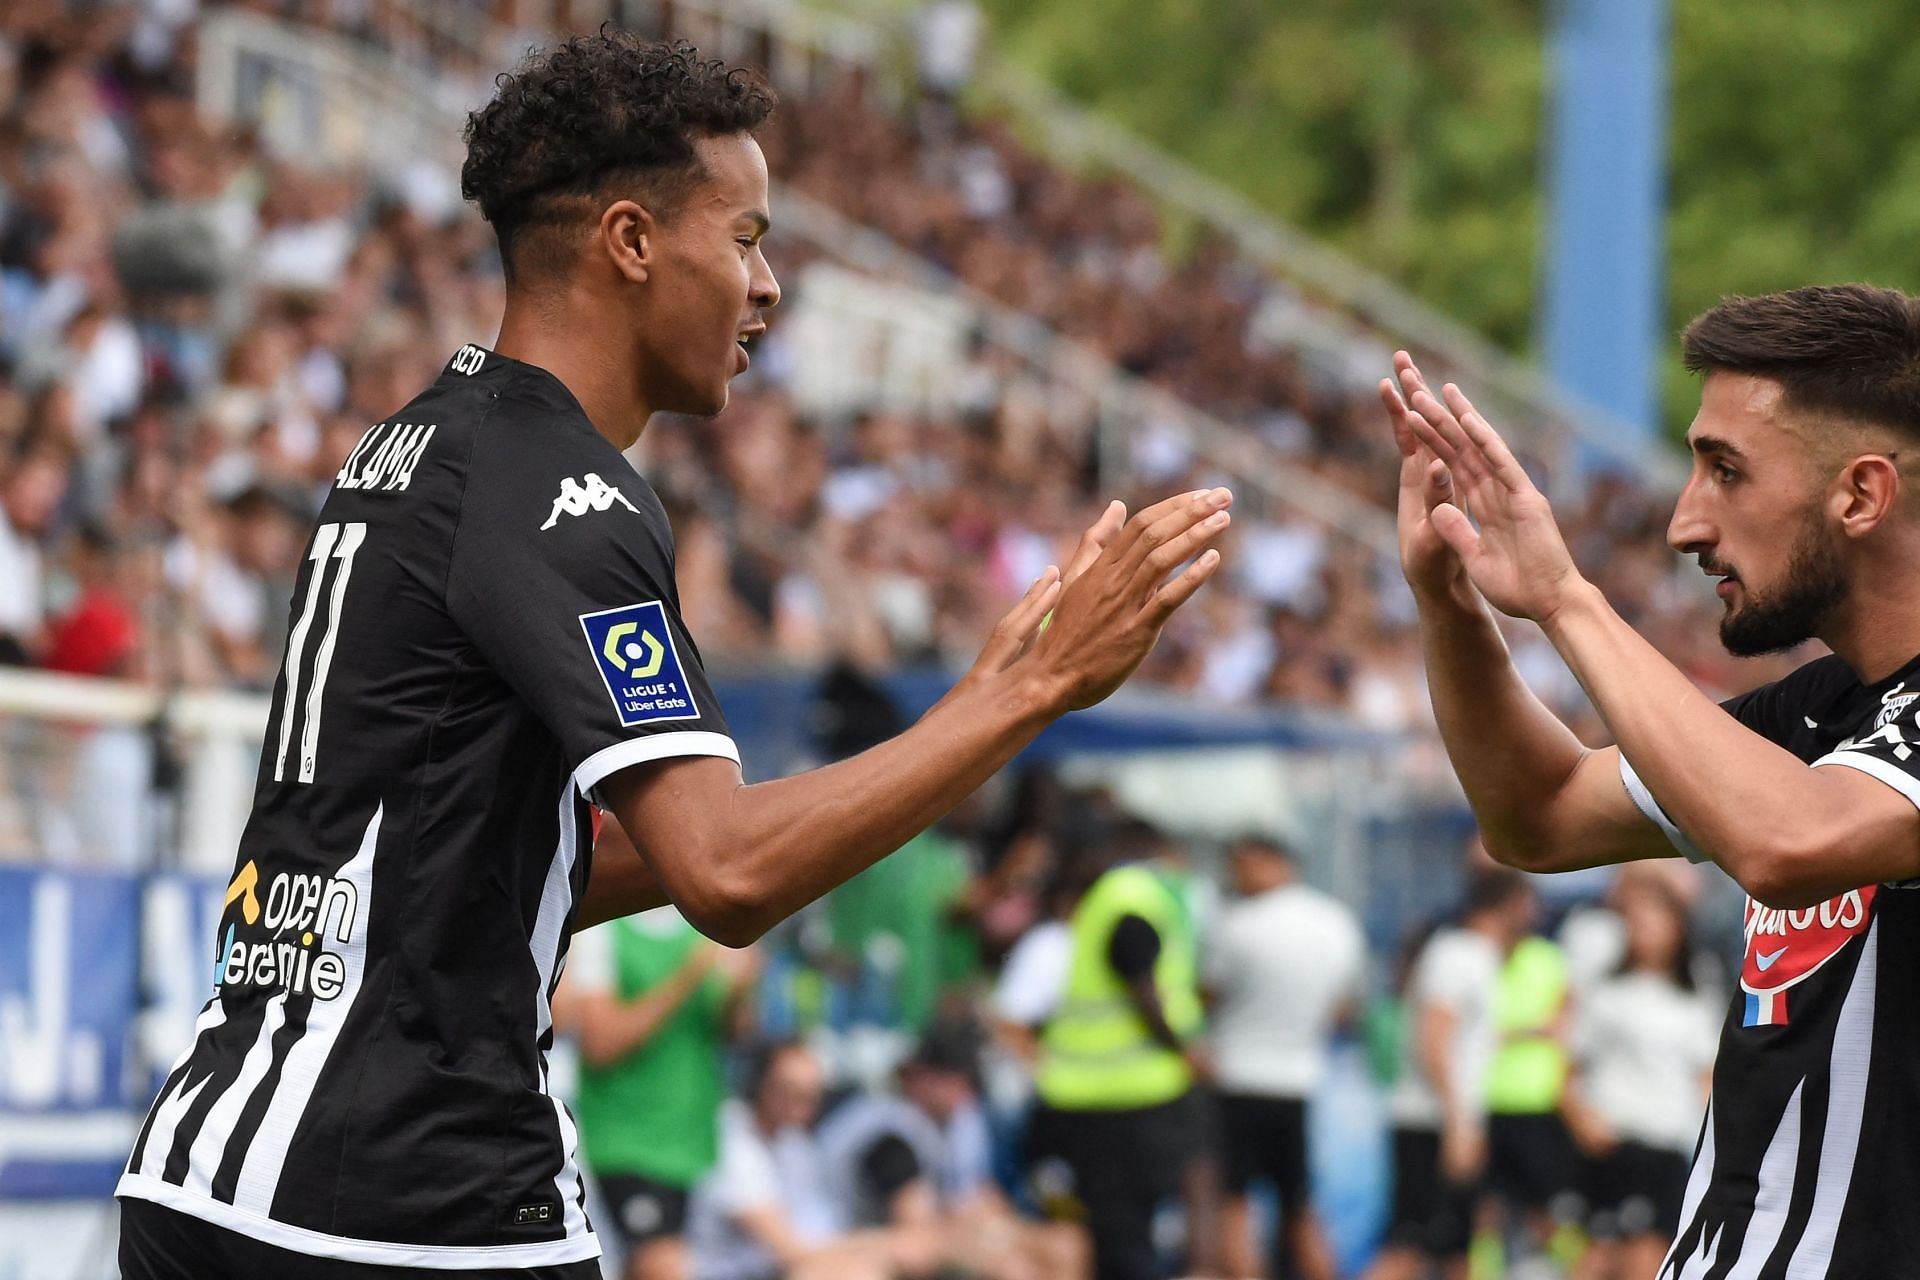 Angers will host Brest on Sunday - Ligue 1